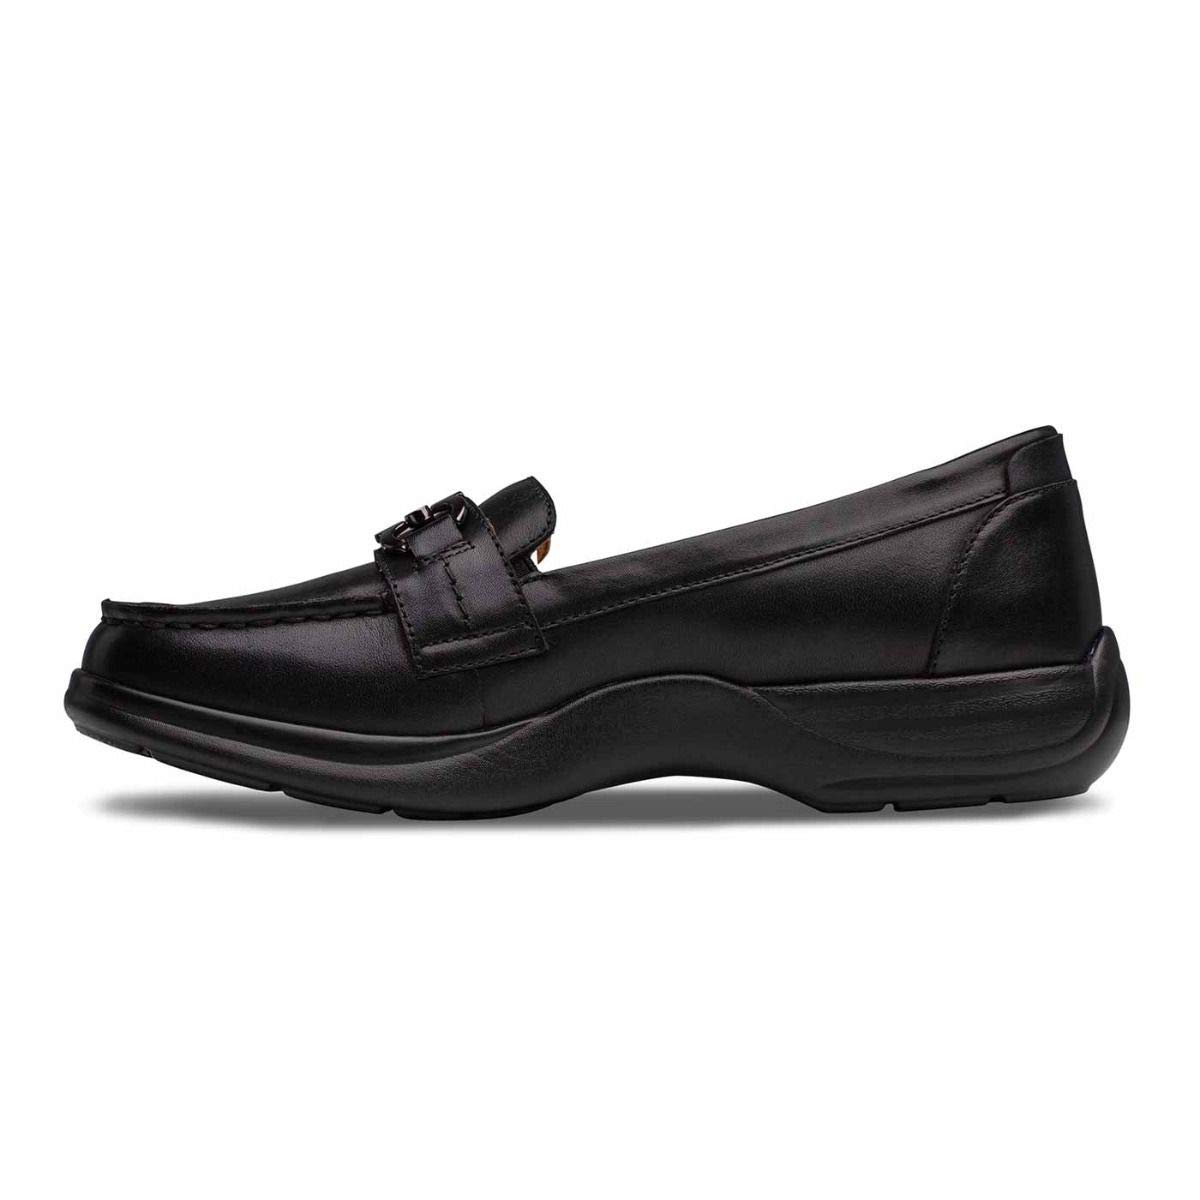 Dr. Comfort Mallory Diabetic Dress Shoes-Easy Off Leather Slip On ...